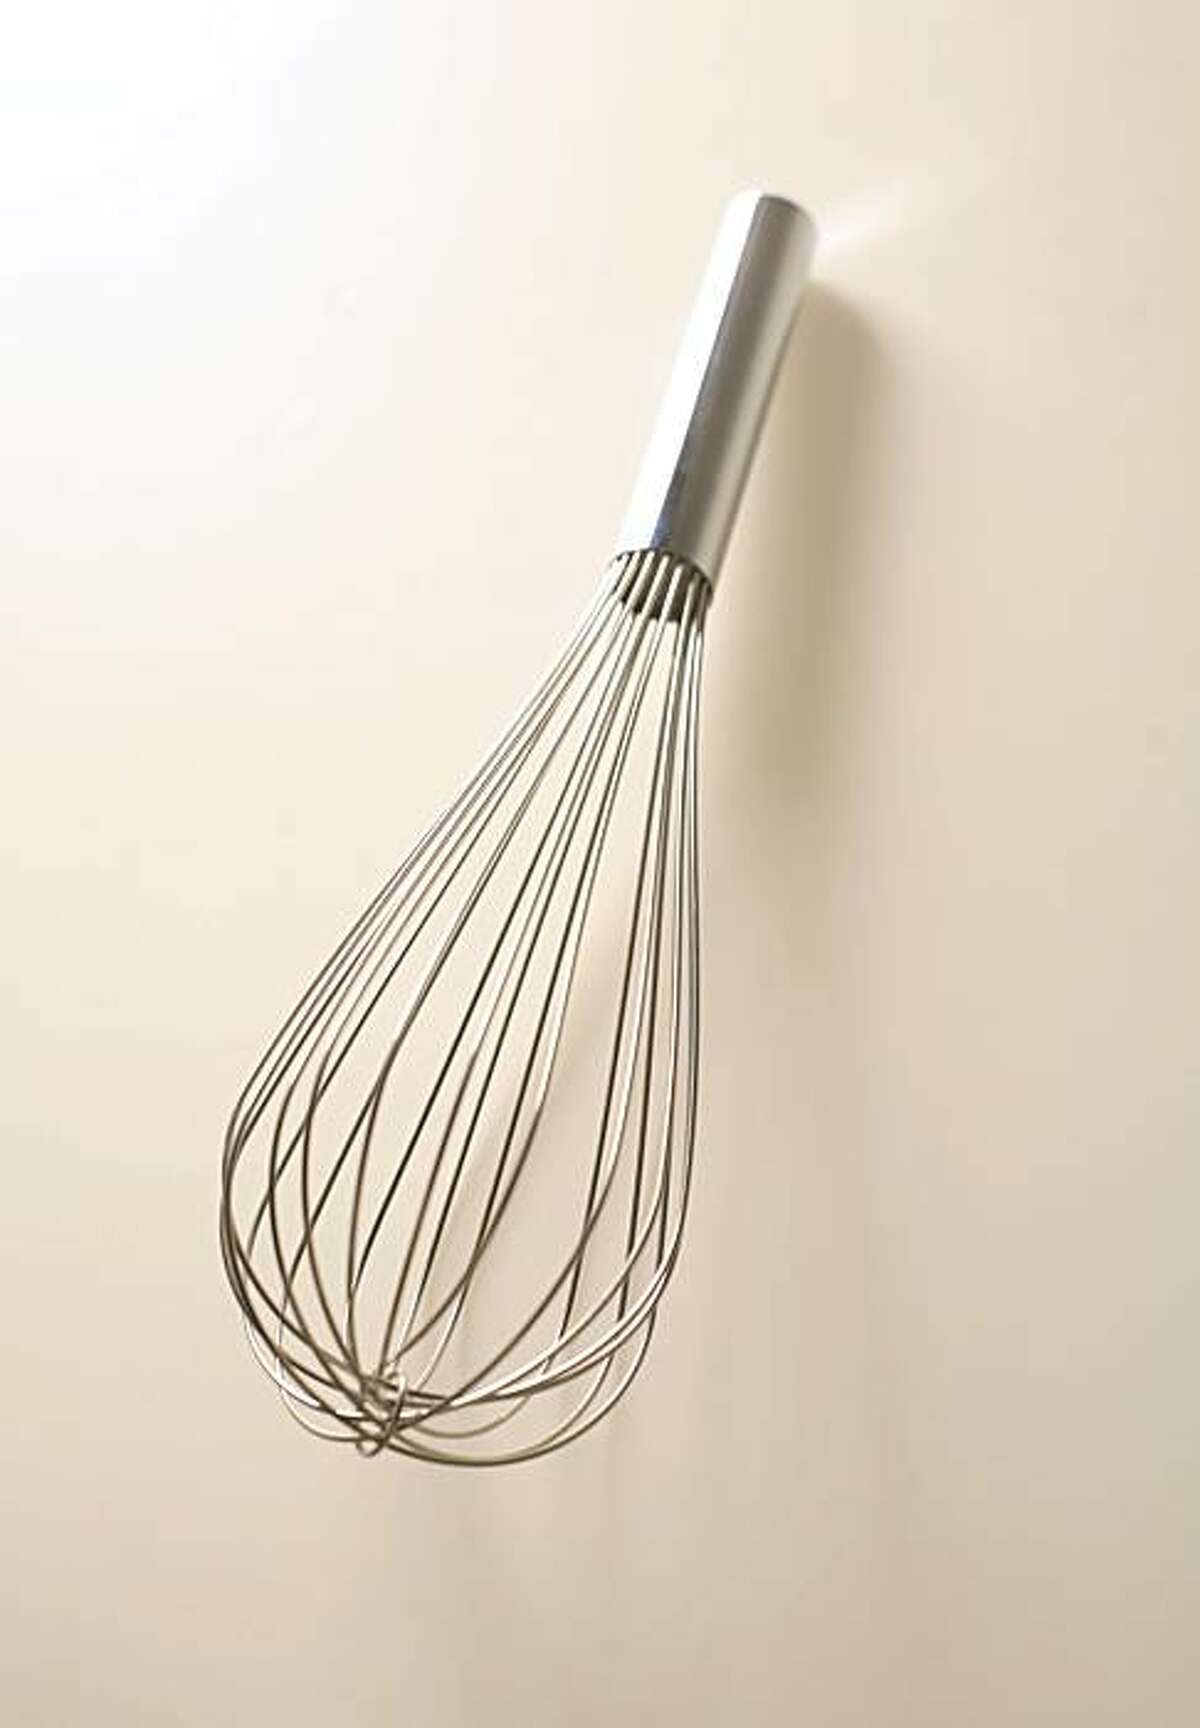 WHATS_WHISK_02_JOHNLEE.JPG APRIL 24, 2008: French balloon wire whisk. BY JOHN LEE / SPECIAL TO THE CHRONICLE